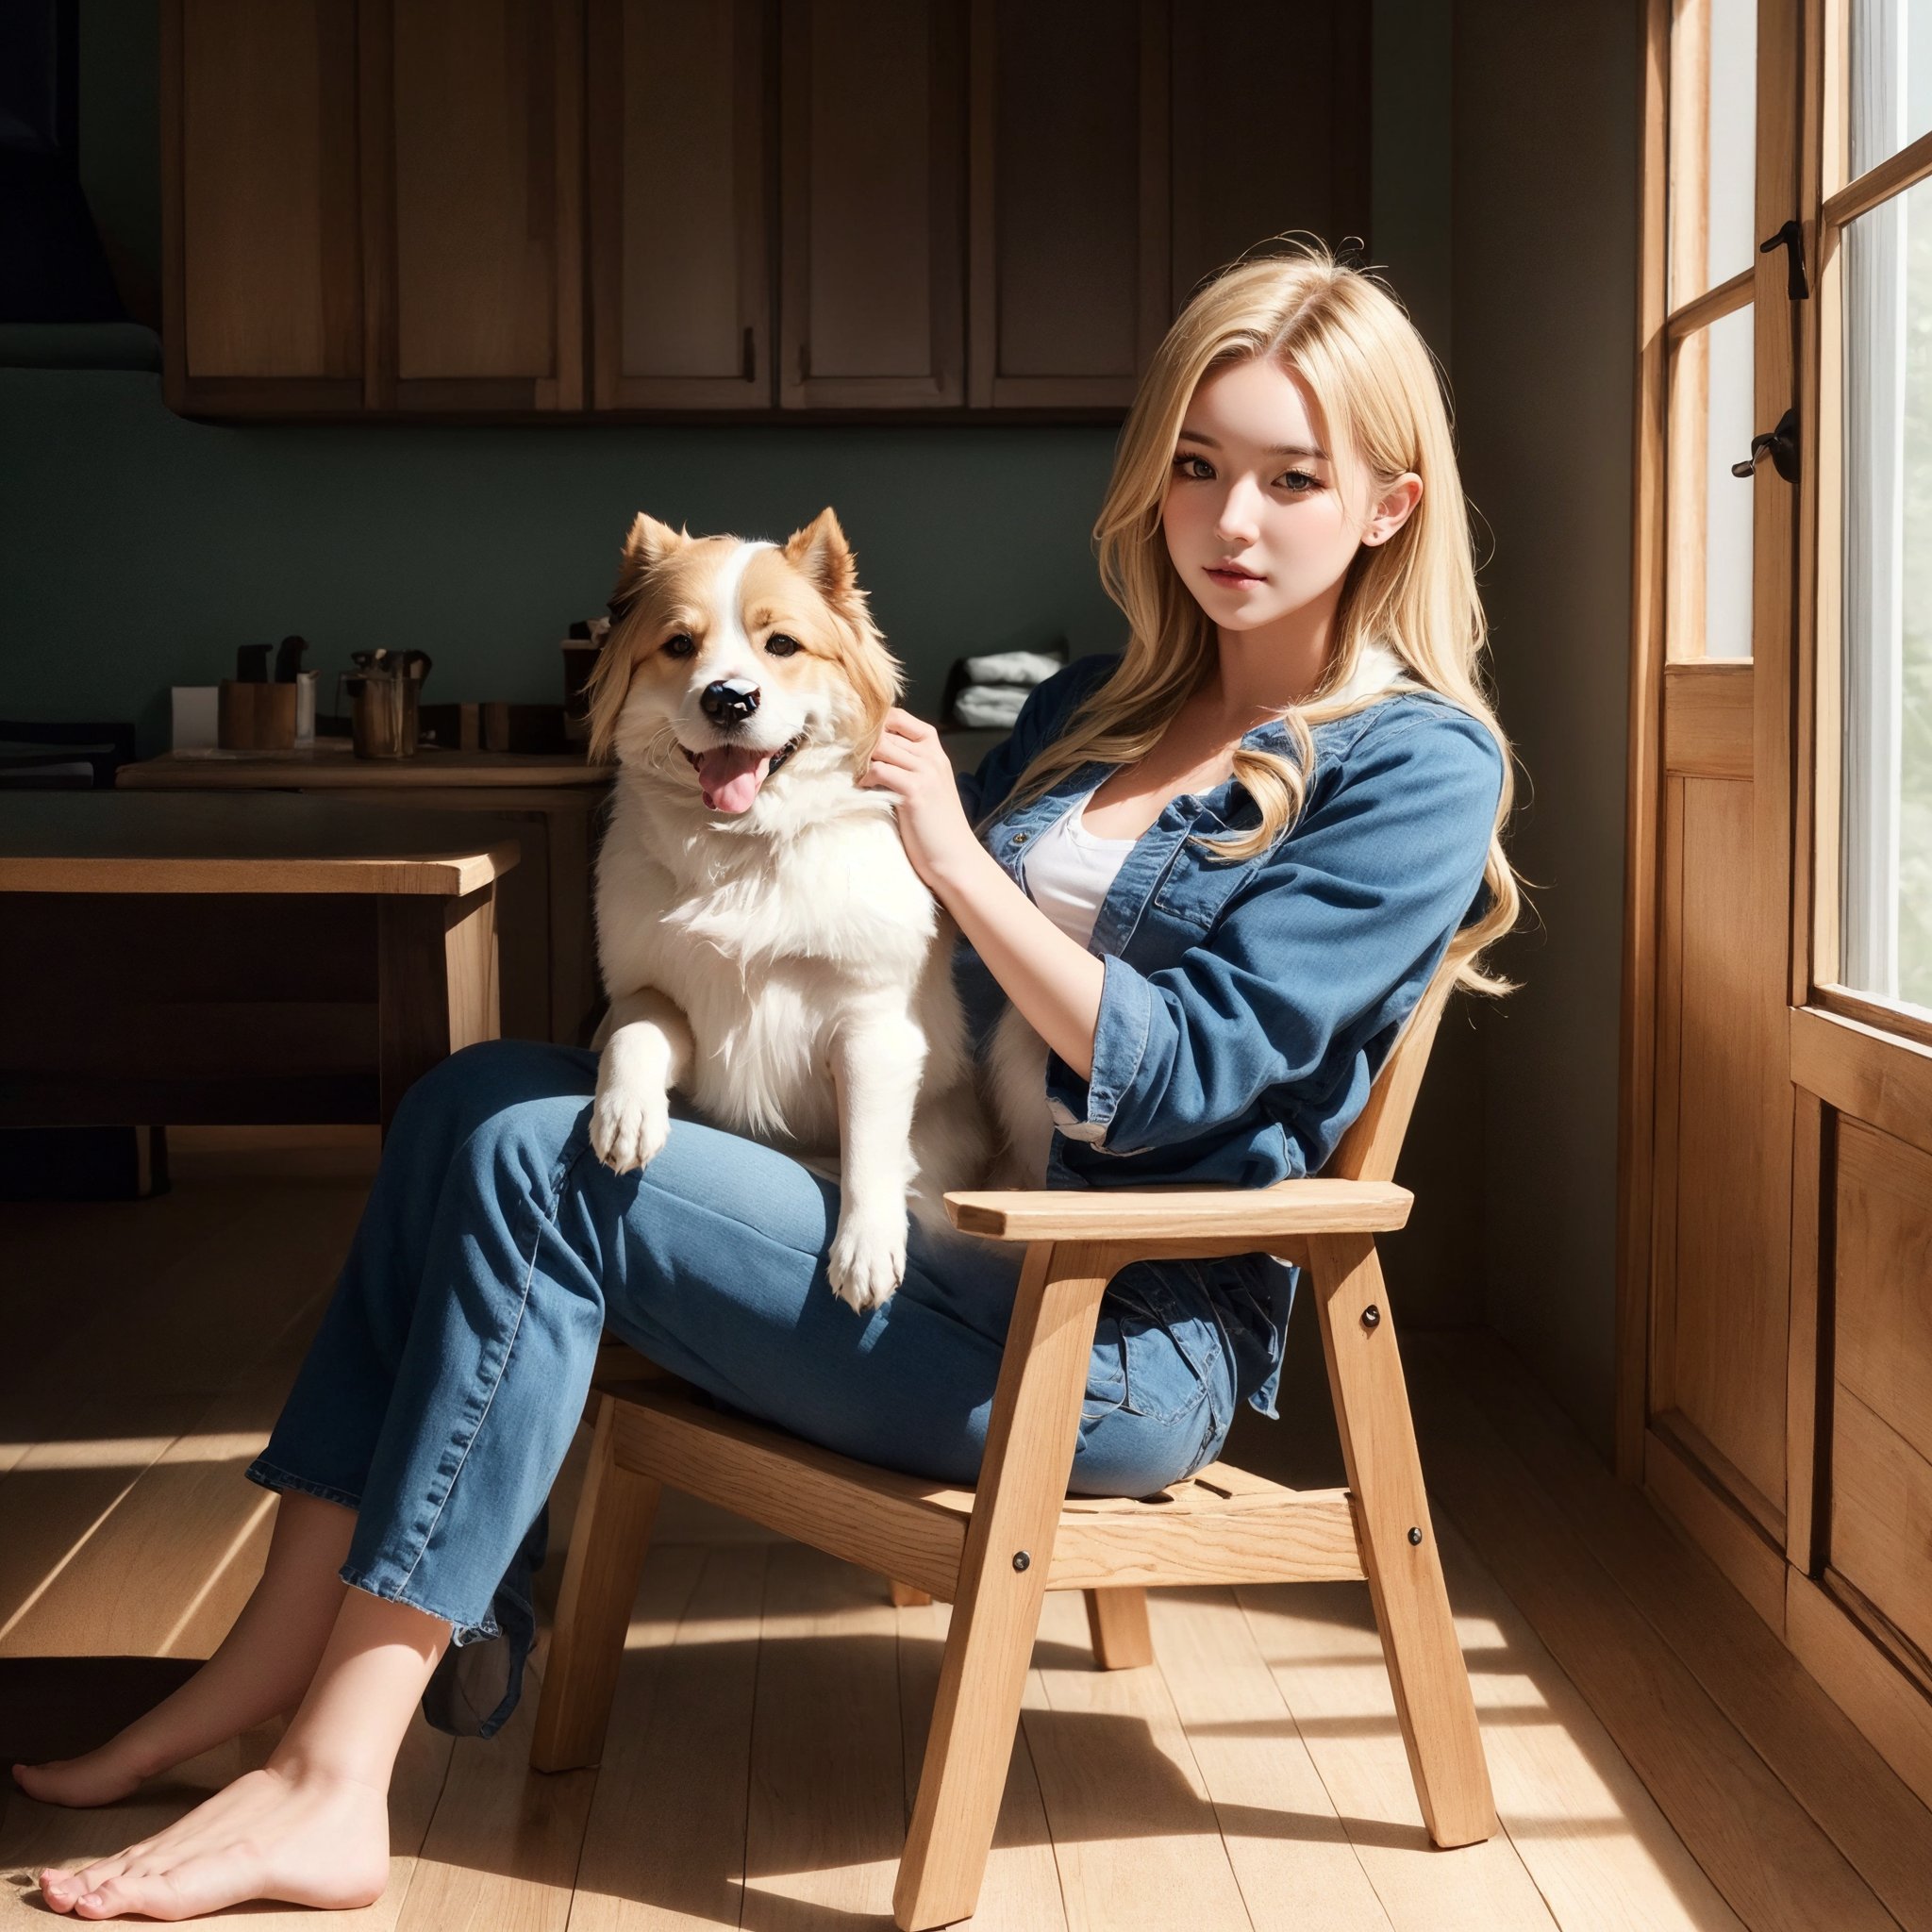 photorealistic instagram model, adorable, 23 year old girl, blue eyss, blonde hair, full body super quailty ultimate quailty, extreme quailty, realistic lighting, realistic shadows, 8k super quailty,  hoding cute dog in her arms sitting in a chair at home,
